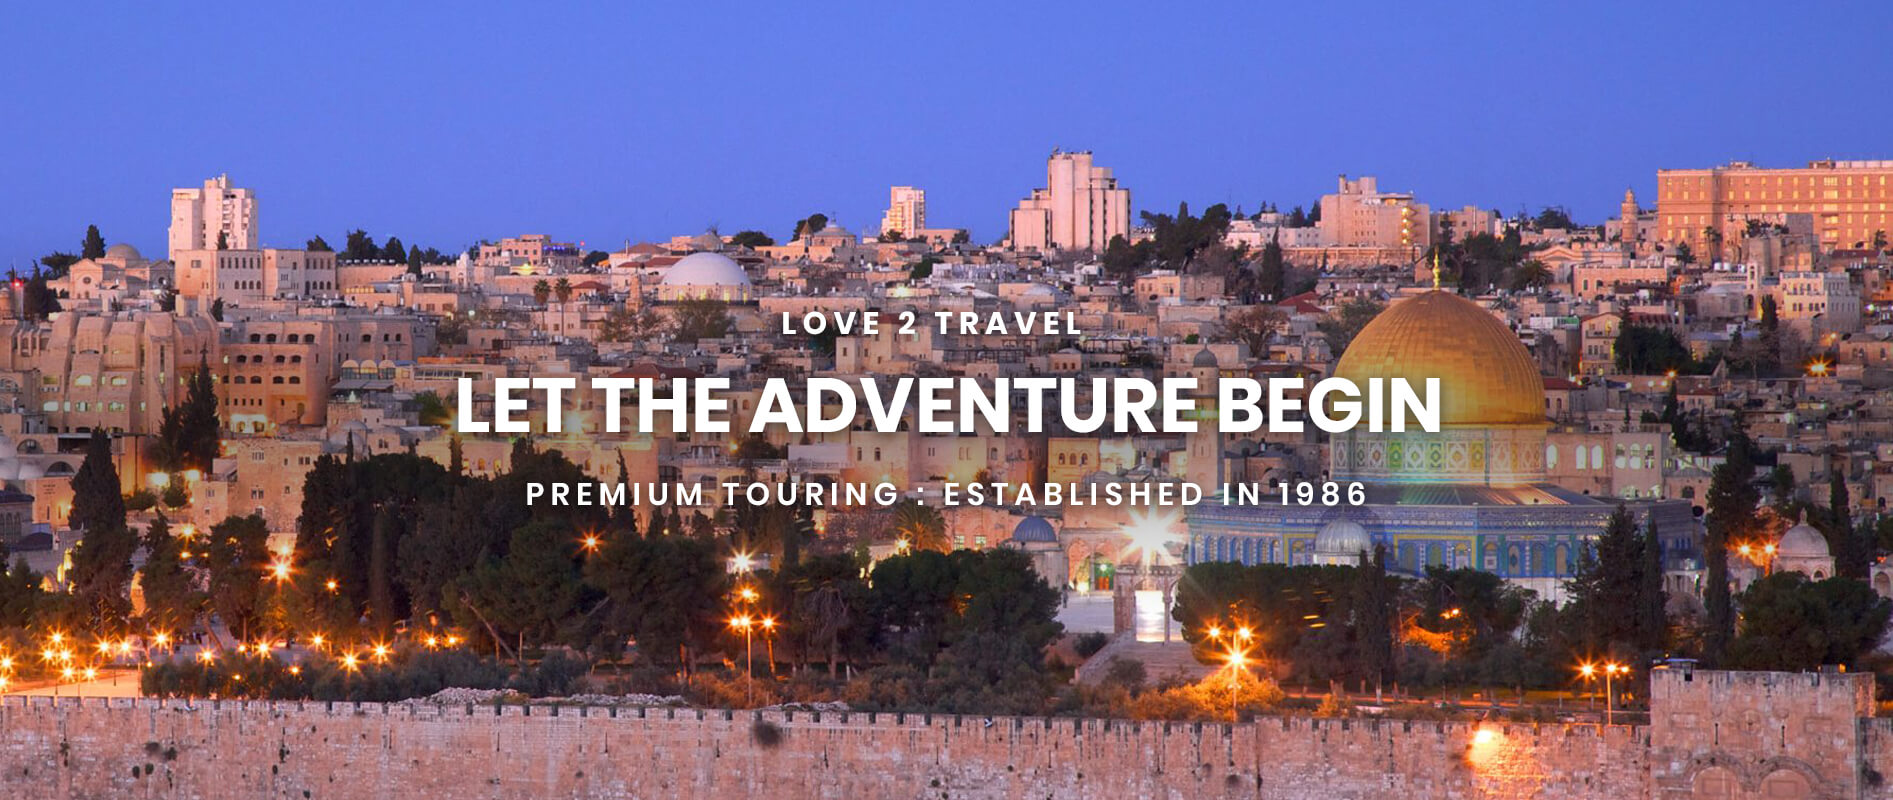 travel agency tours to israel